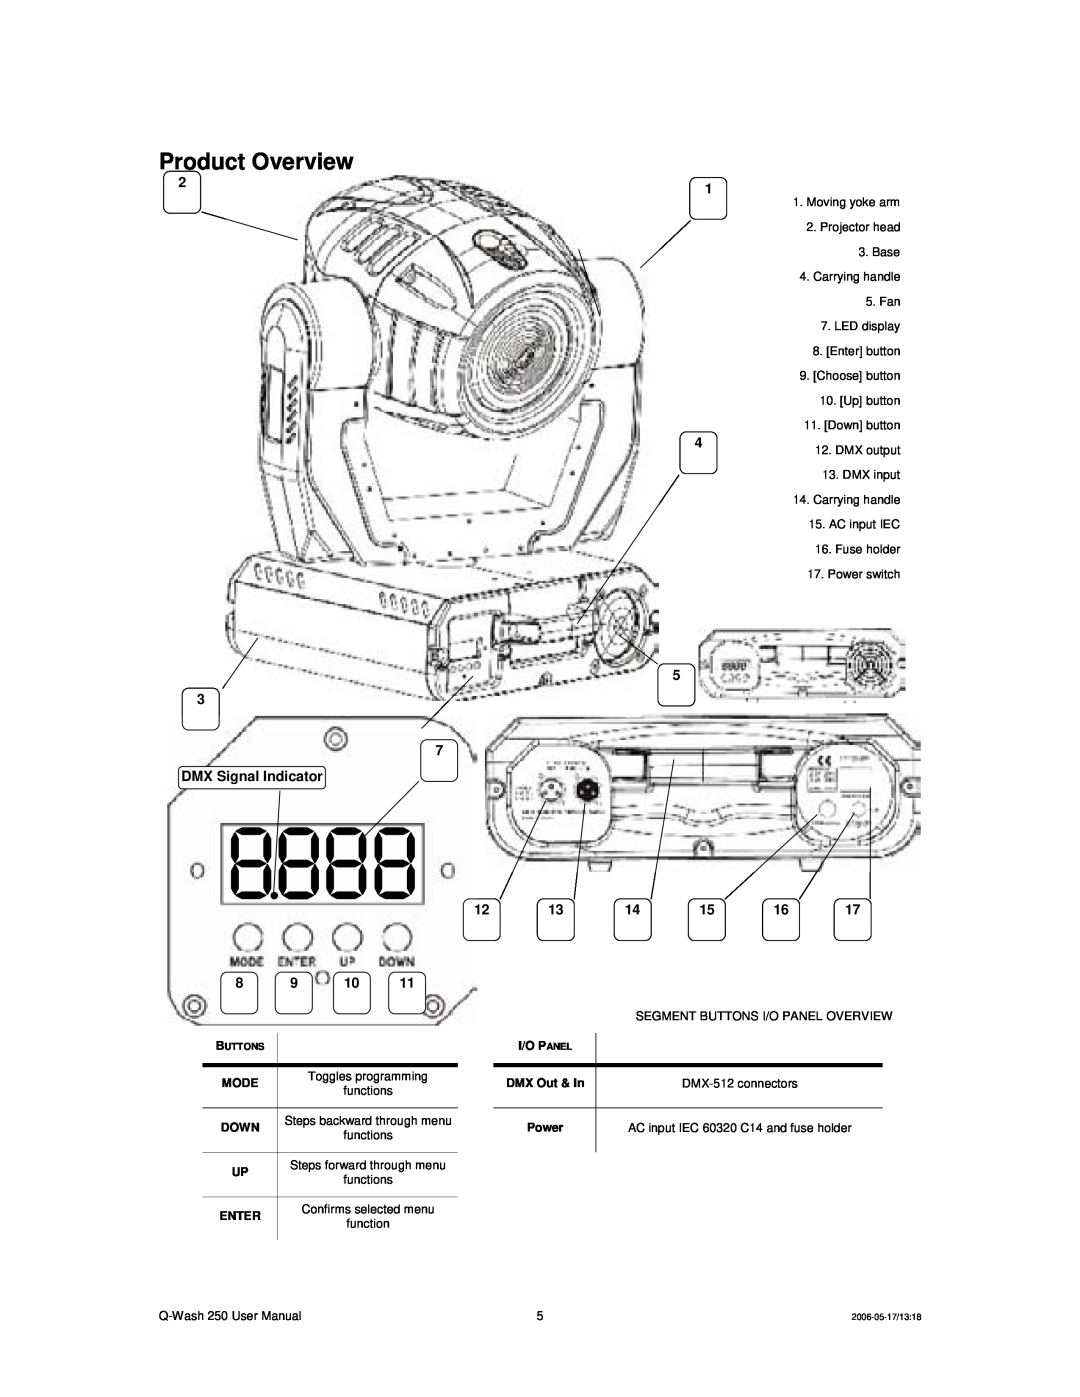 Chauvet 250 user manual Product Overview, 2 3 7 DMX Signal Indicator 12 8 9 10, 5 14 15 16 